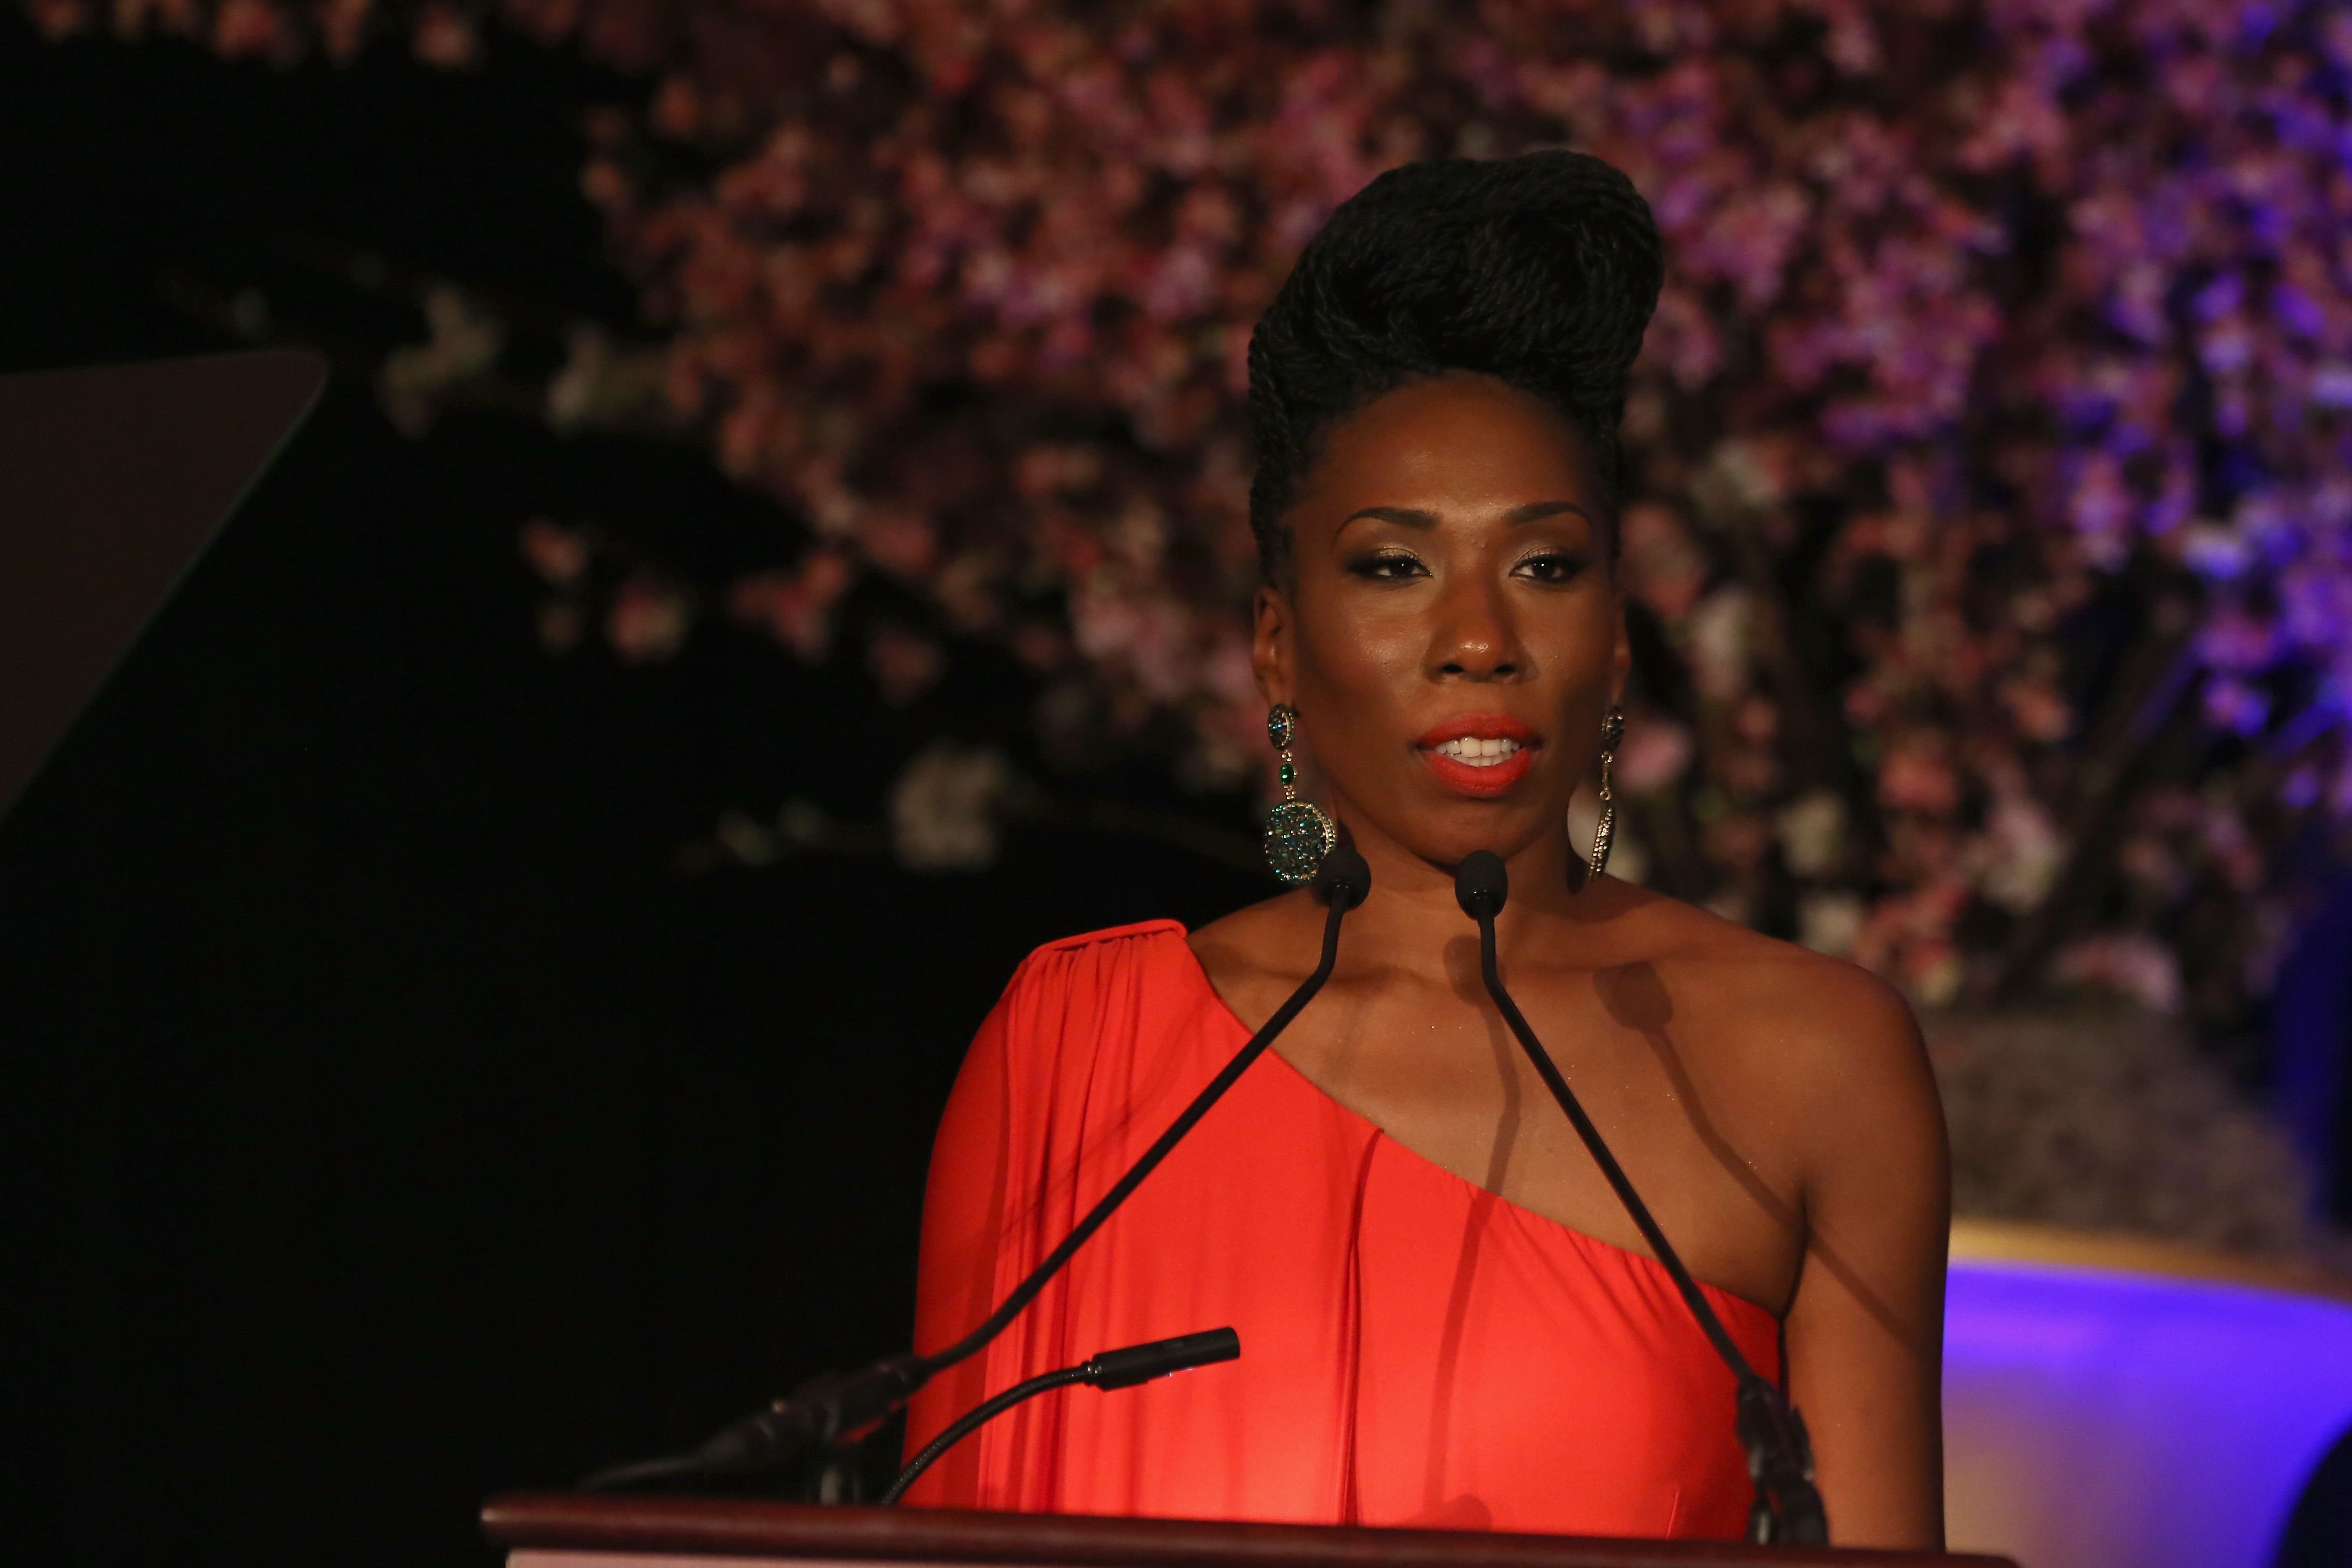 Brandi Harvey stands behind a podium during her speech at the "Steve & Marjorie Harvey Foundation Gala" on May 3, 2014, in Chicago, Illinois | Source: Getty Images